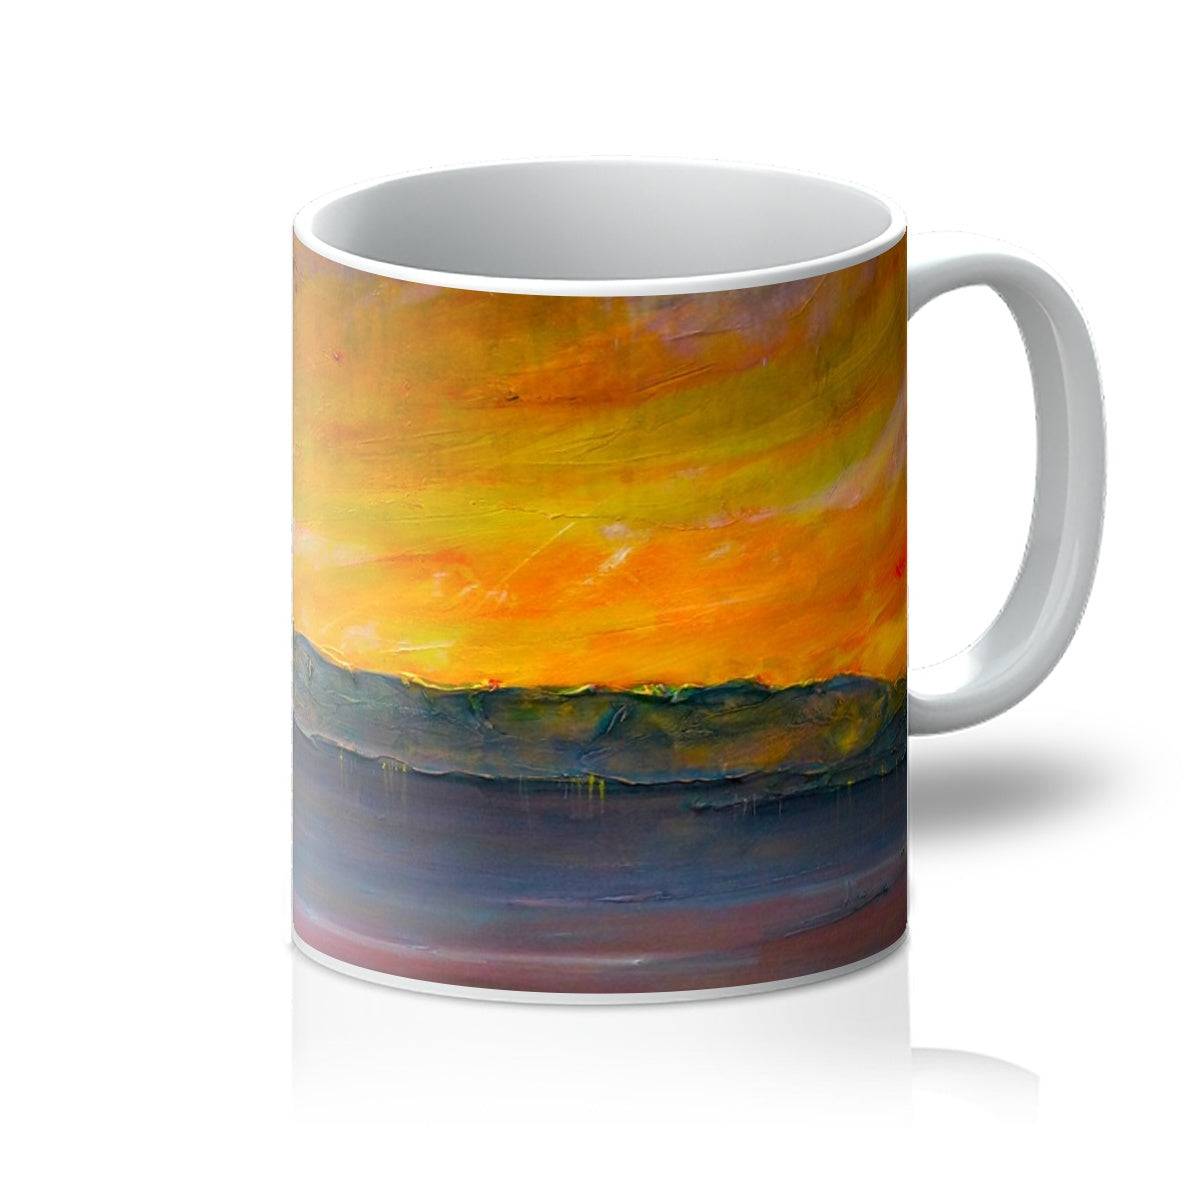 Sunset Over Gourock Art Gifts Mug-Mugs-River Clyde Art Gallery-11oz-White-Paintings, Prints, Homeware, Art Gifts From Scotland By Scottish Artist Kevin Hunter